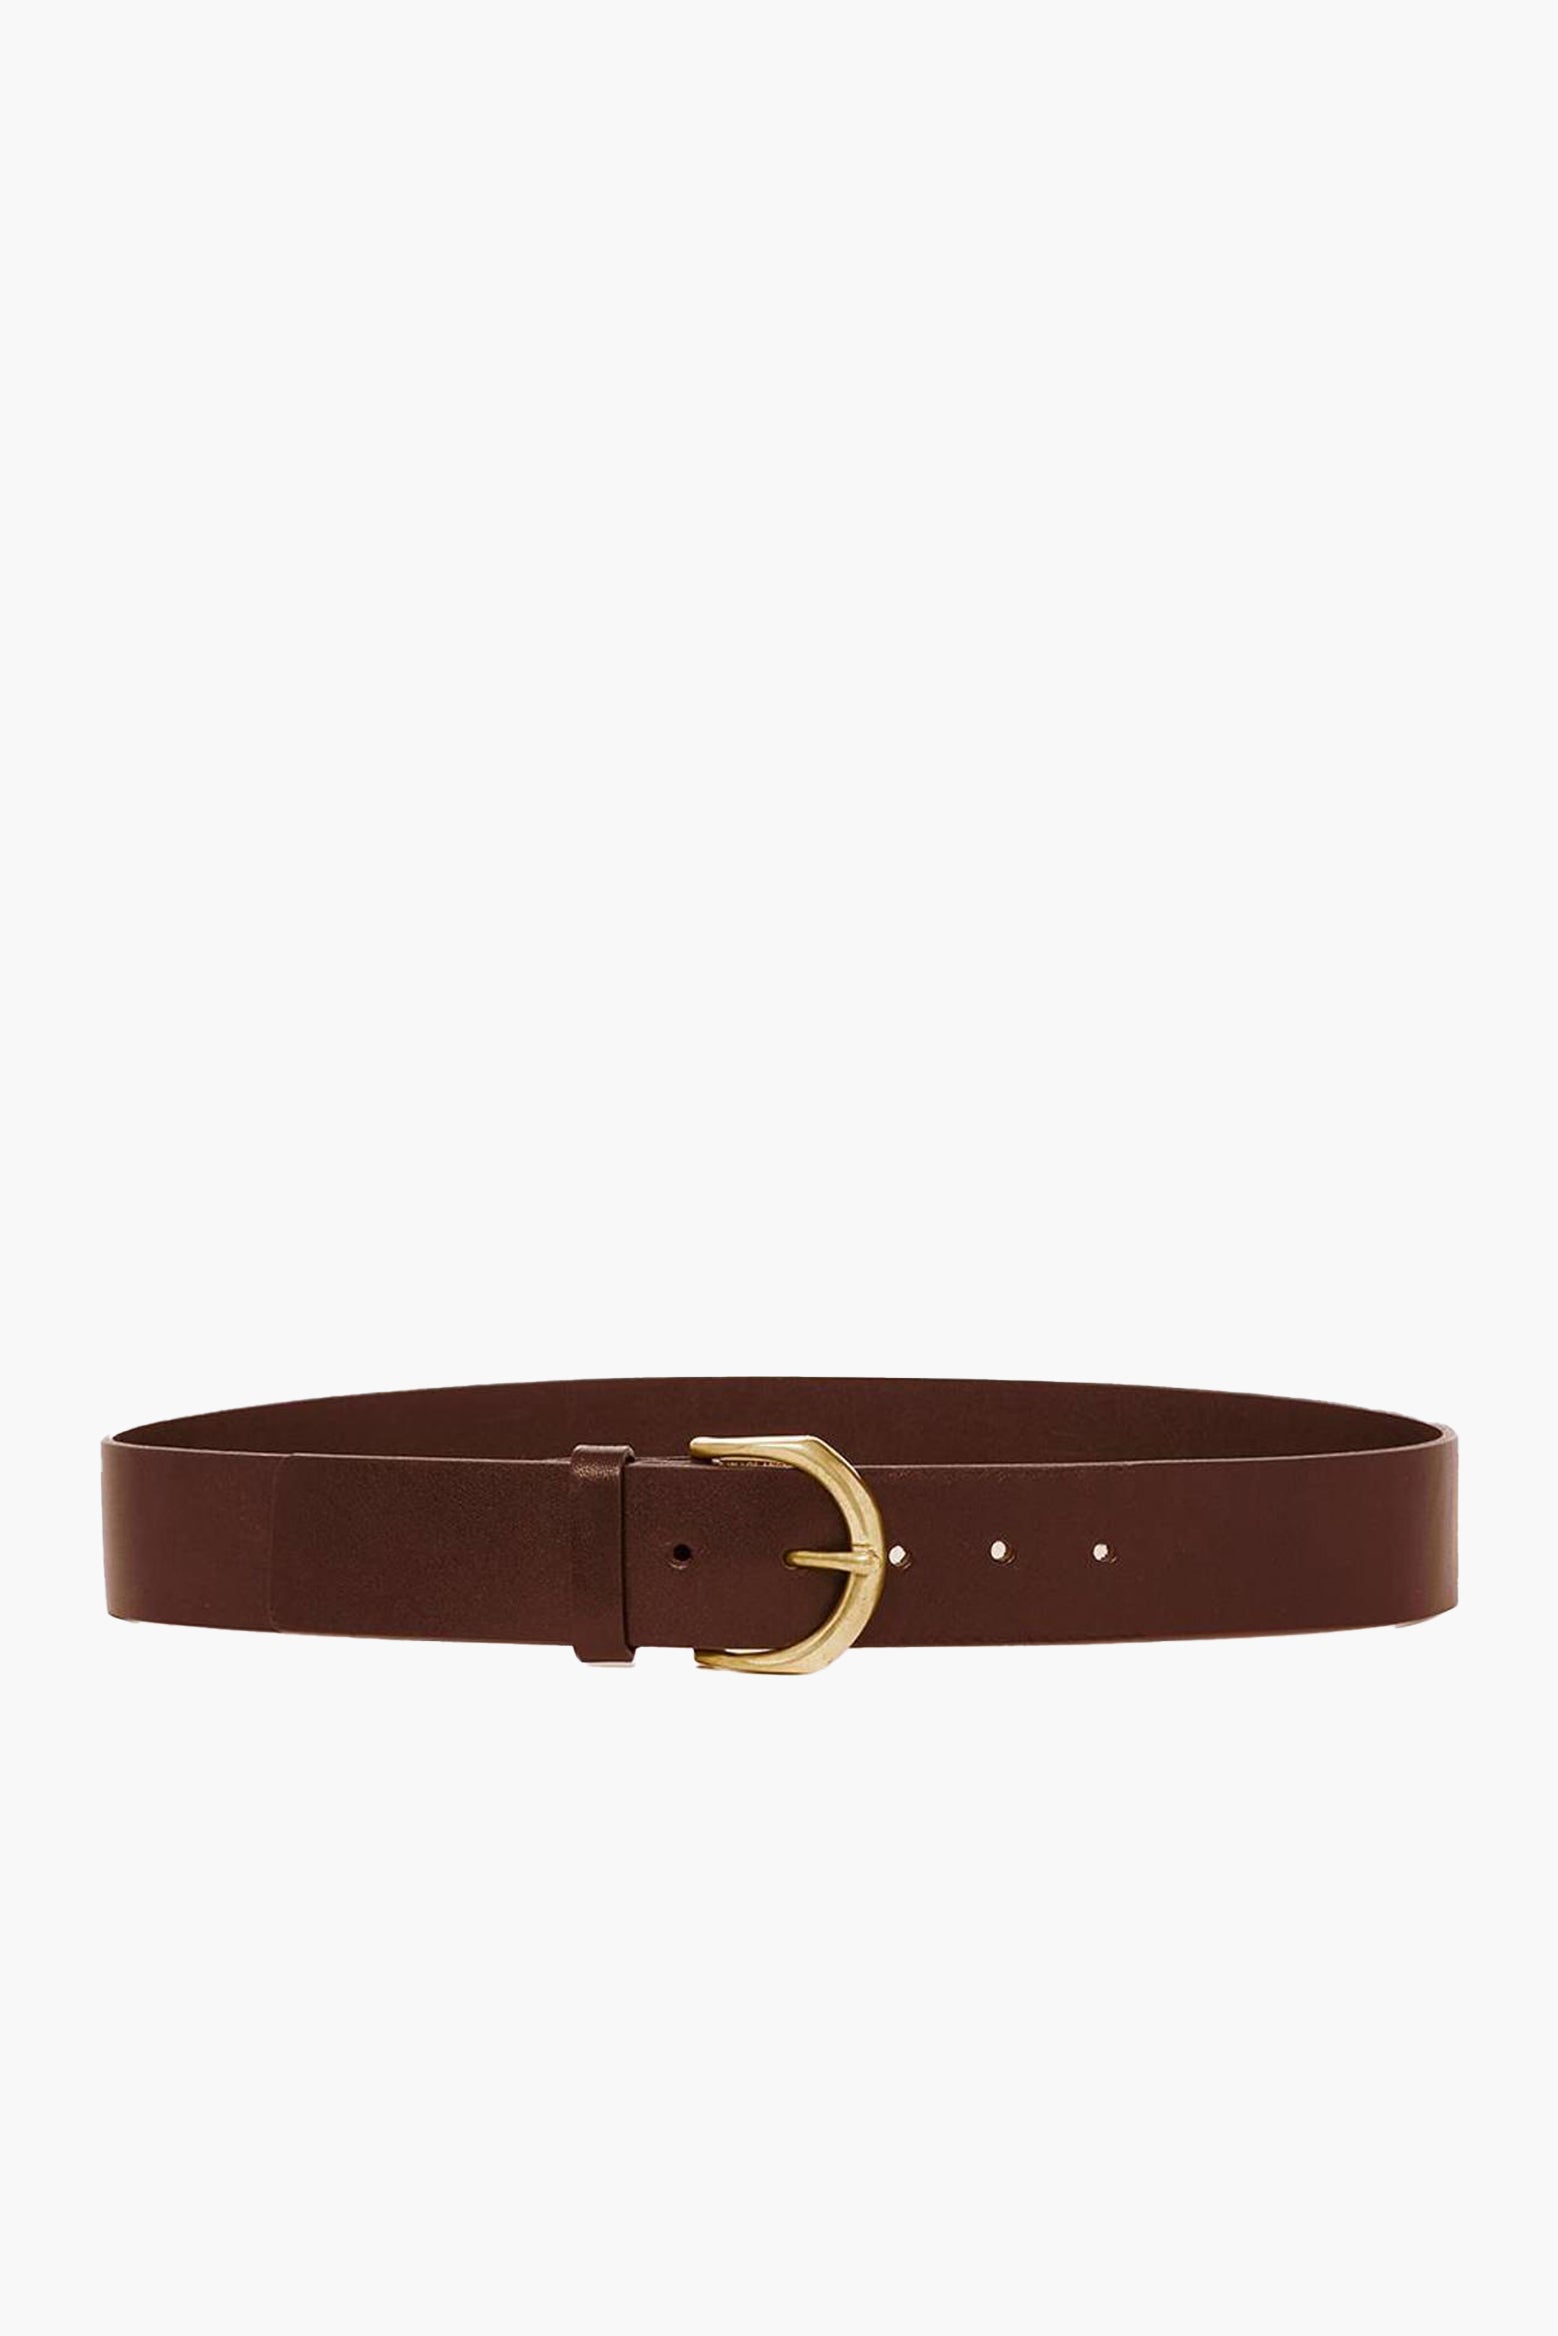 The Janessa Leone Cato Belt in Cognac available at The New Trend Australia.